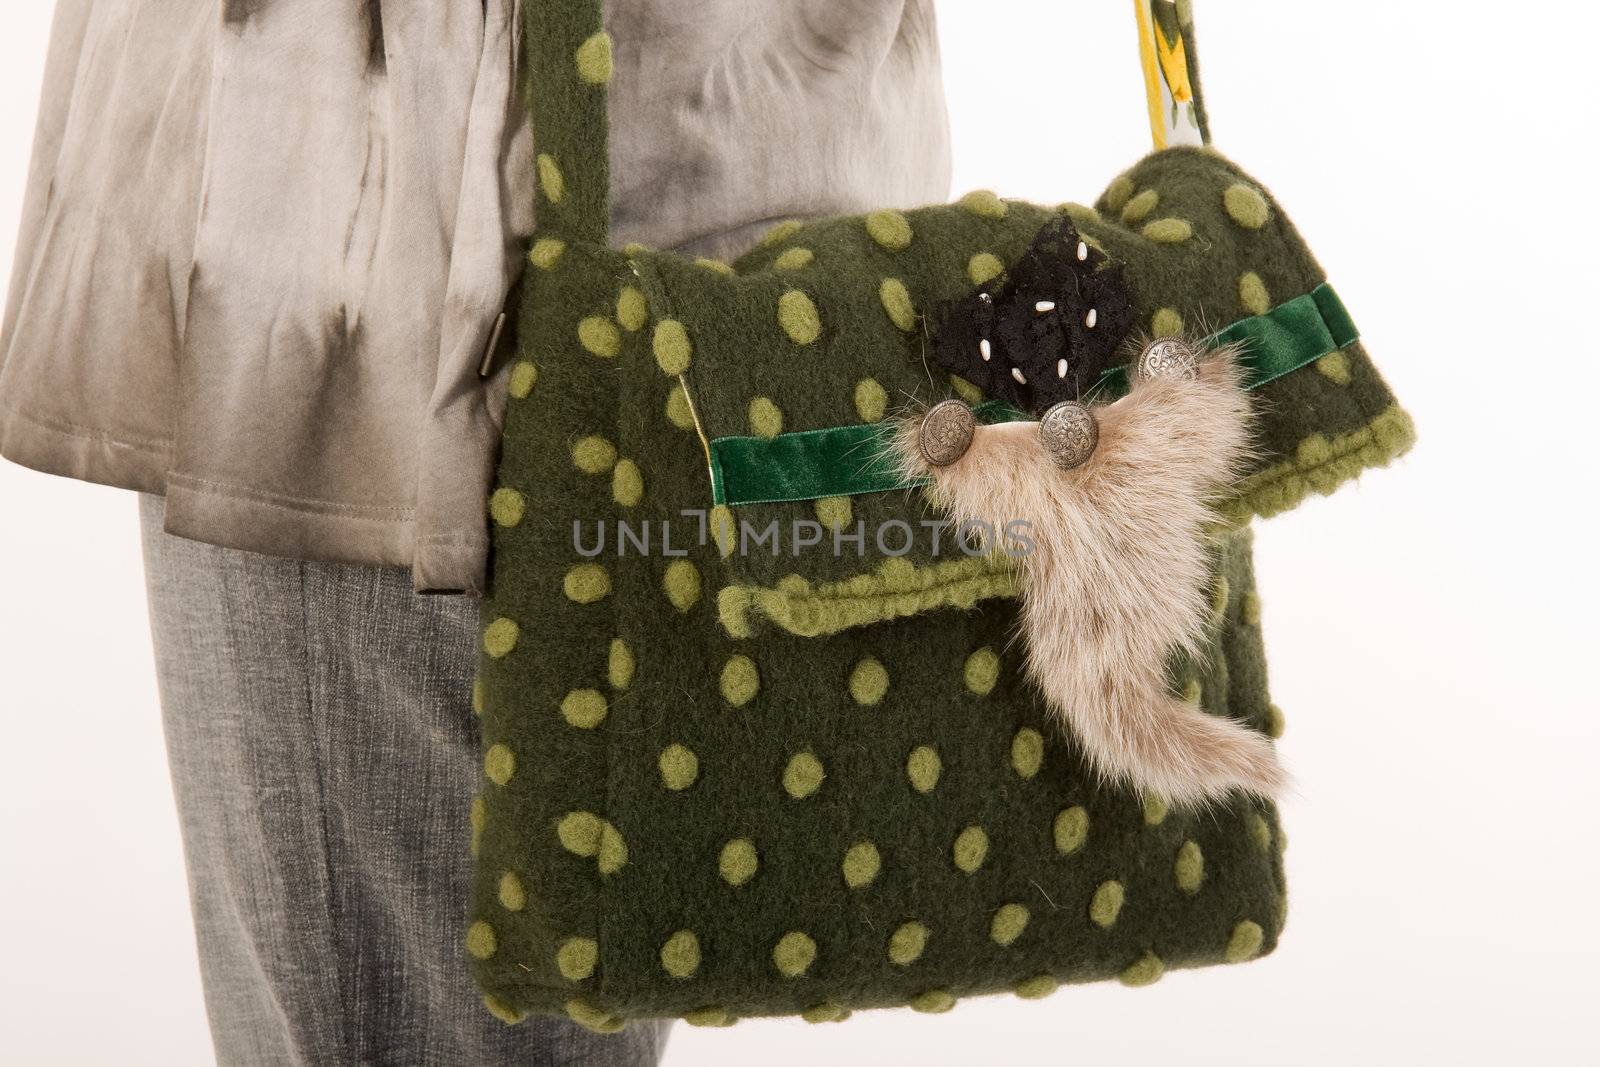 Shooping-bag by STphotography